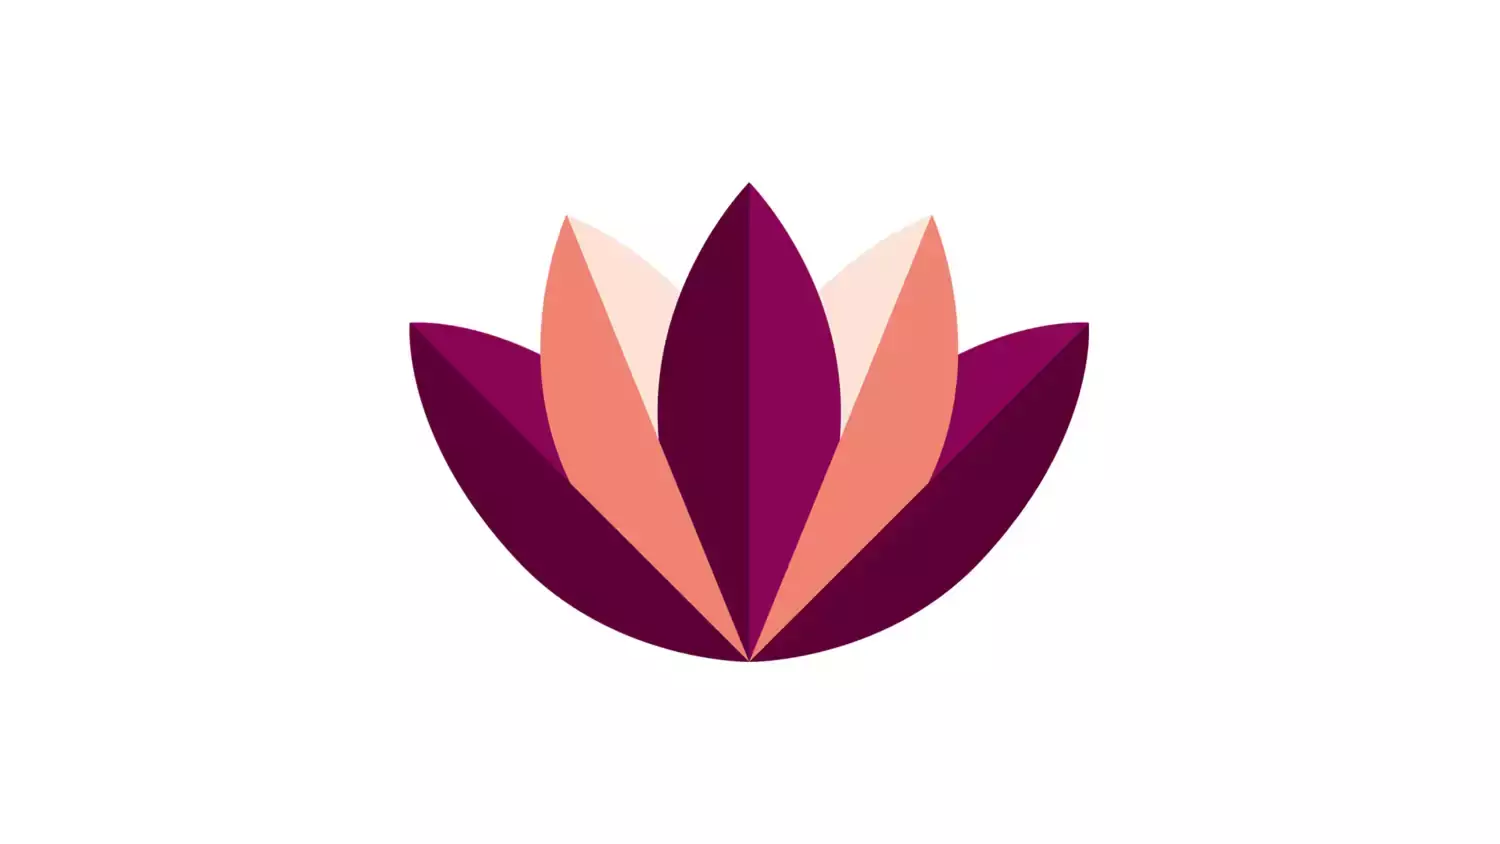 A graphic shape resembling a water lily with pointed petals in KI's profile colour plum purple and lighter shades.